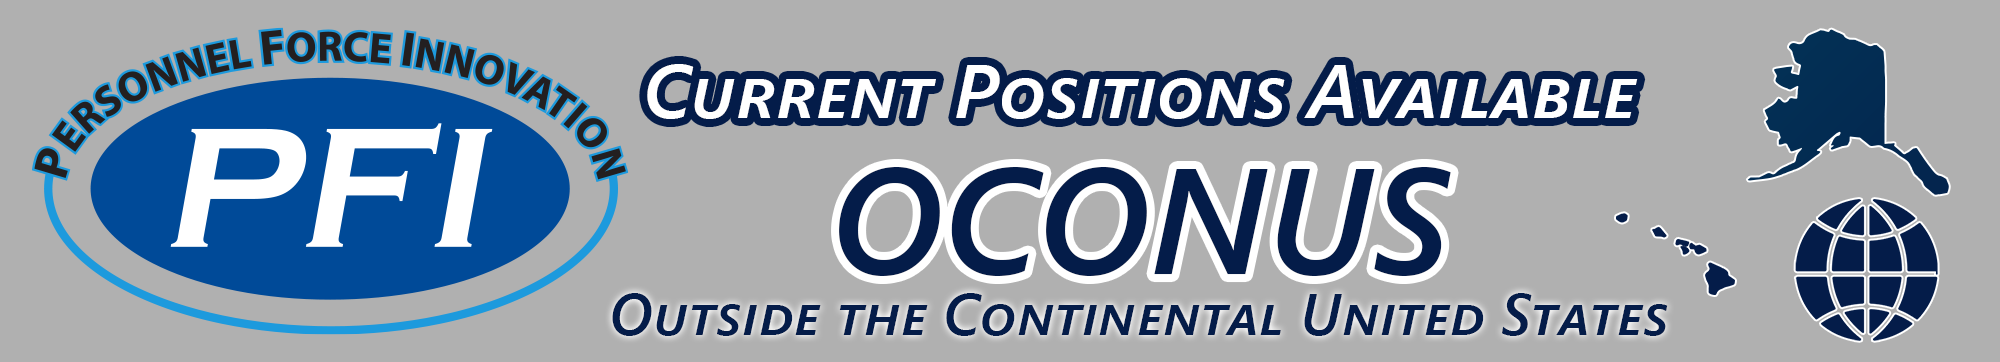 Decorative banner that says Personnel Force Innovation (PFI) current positions available OCONUS